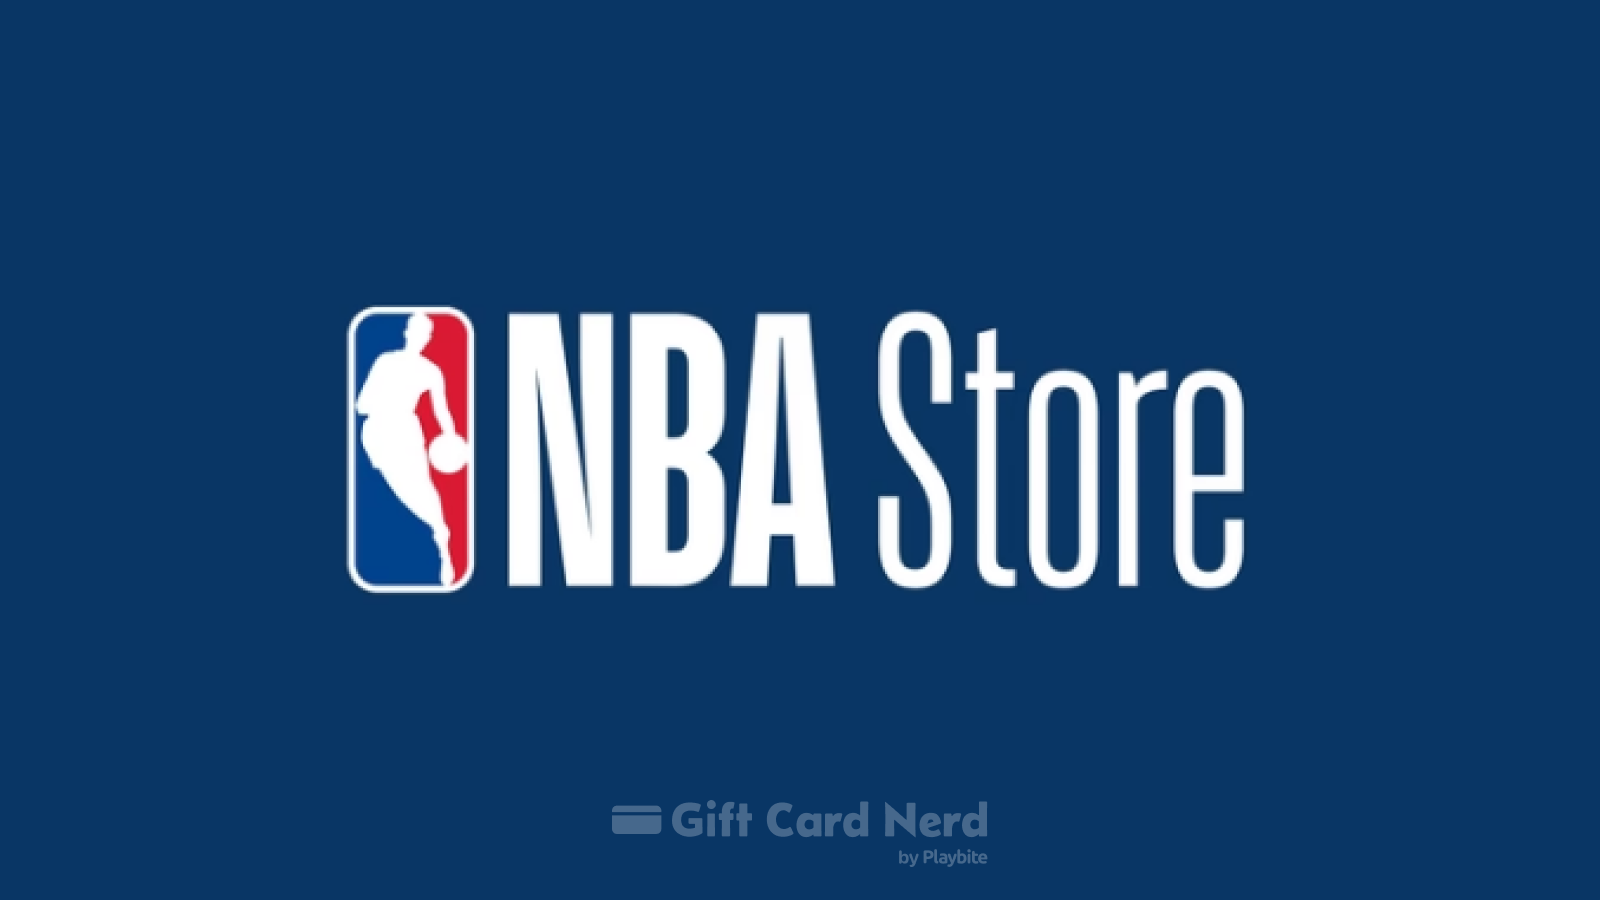 Can I Use an NBA Store Gift Card on Roblox?